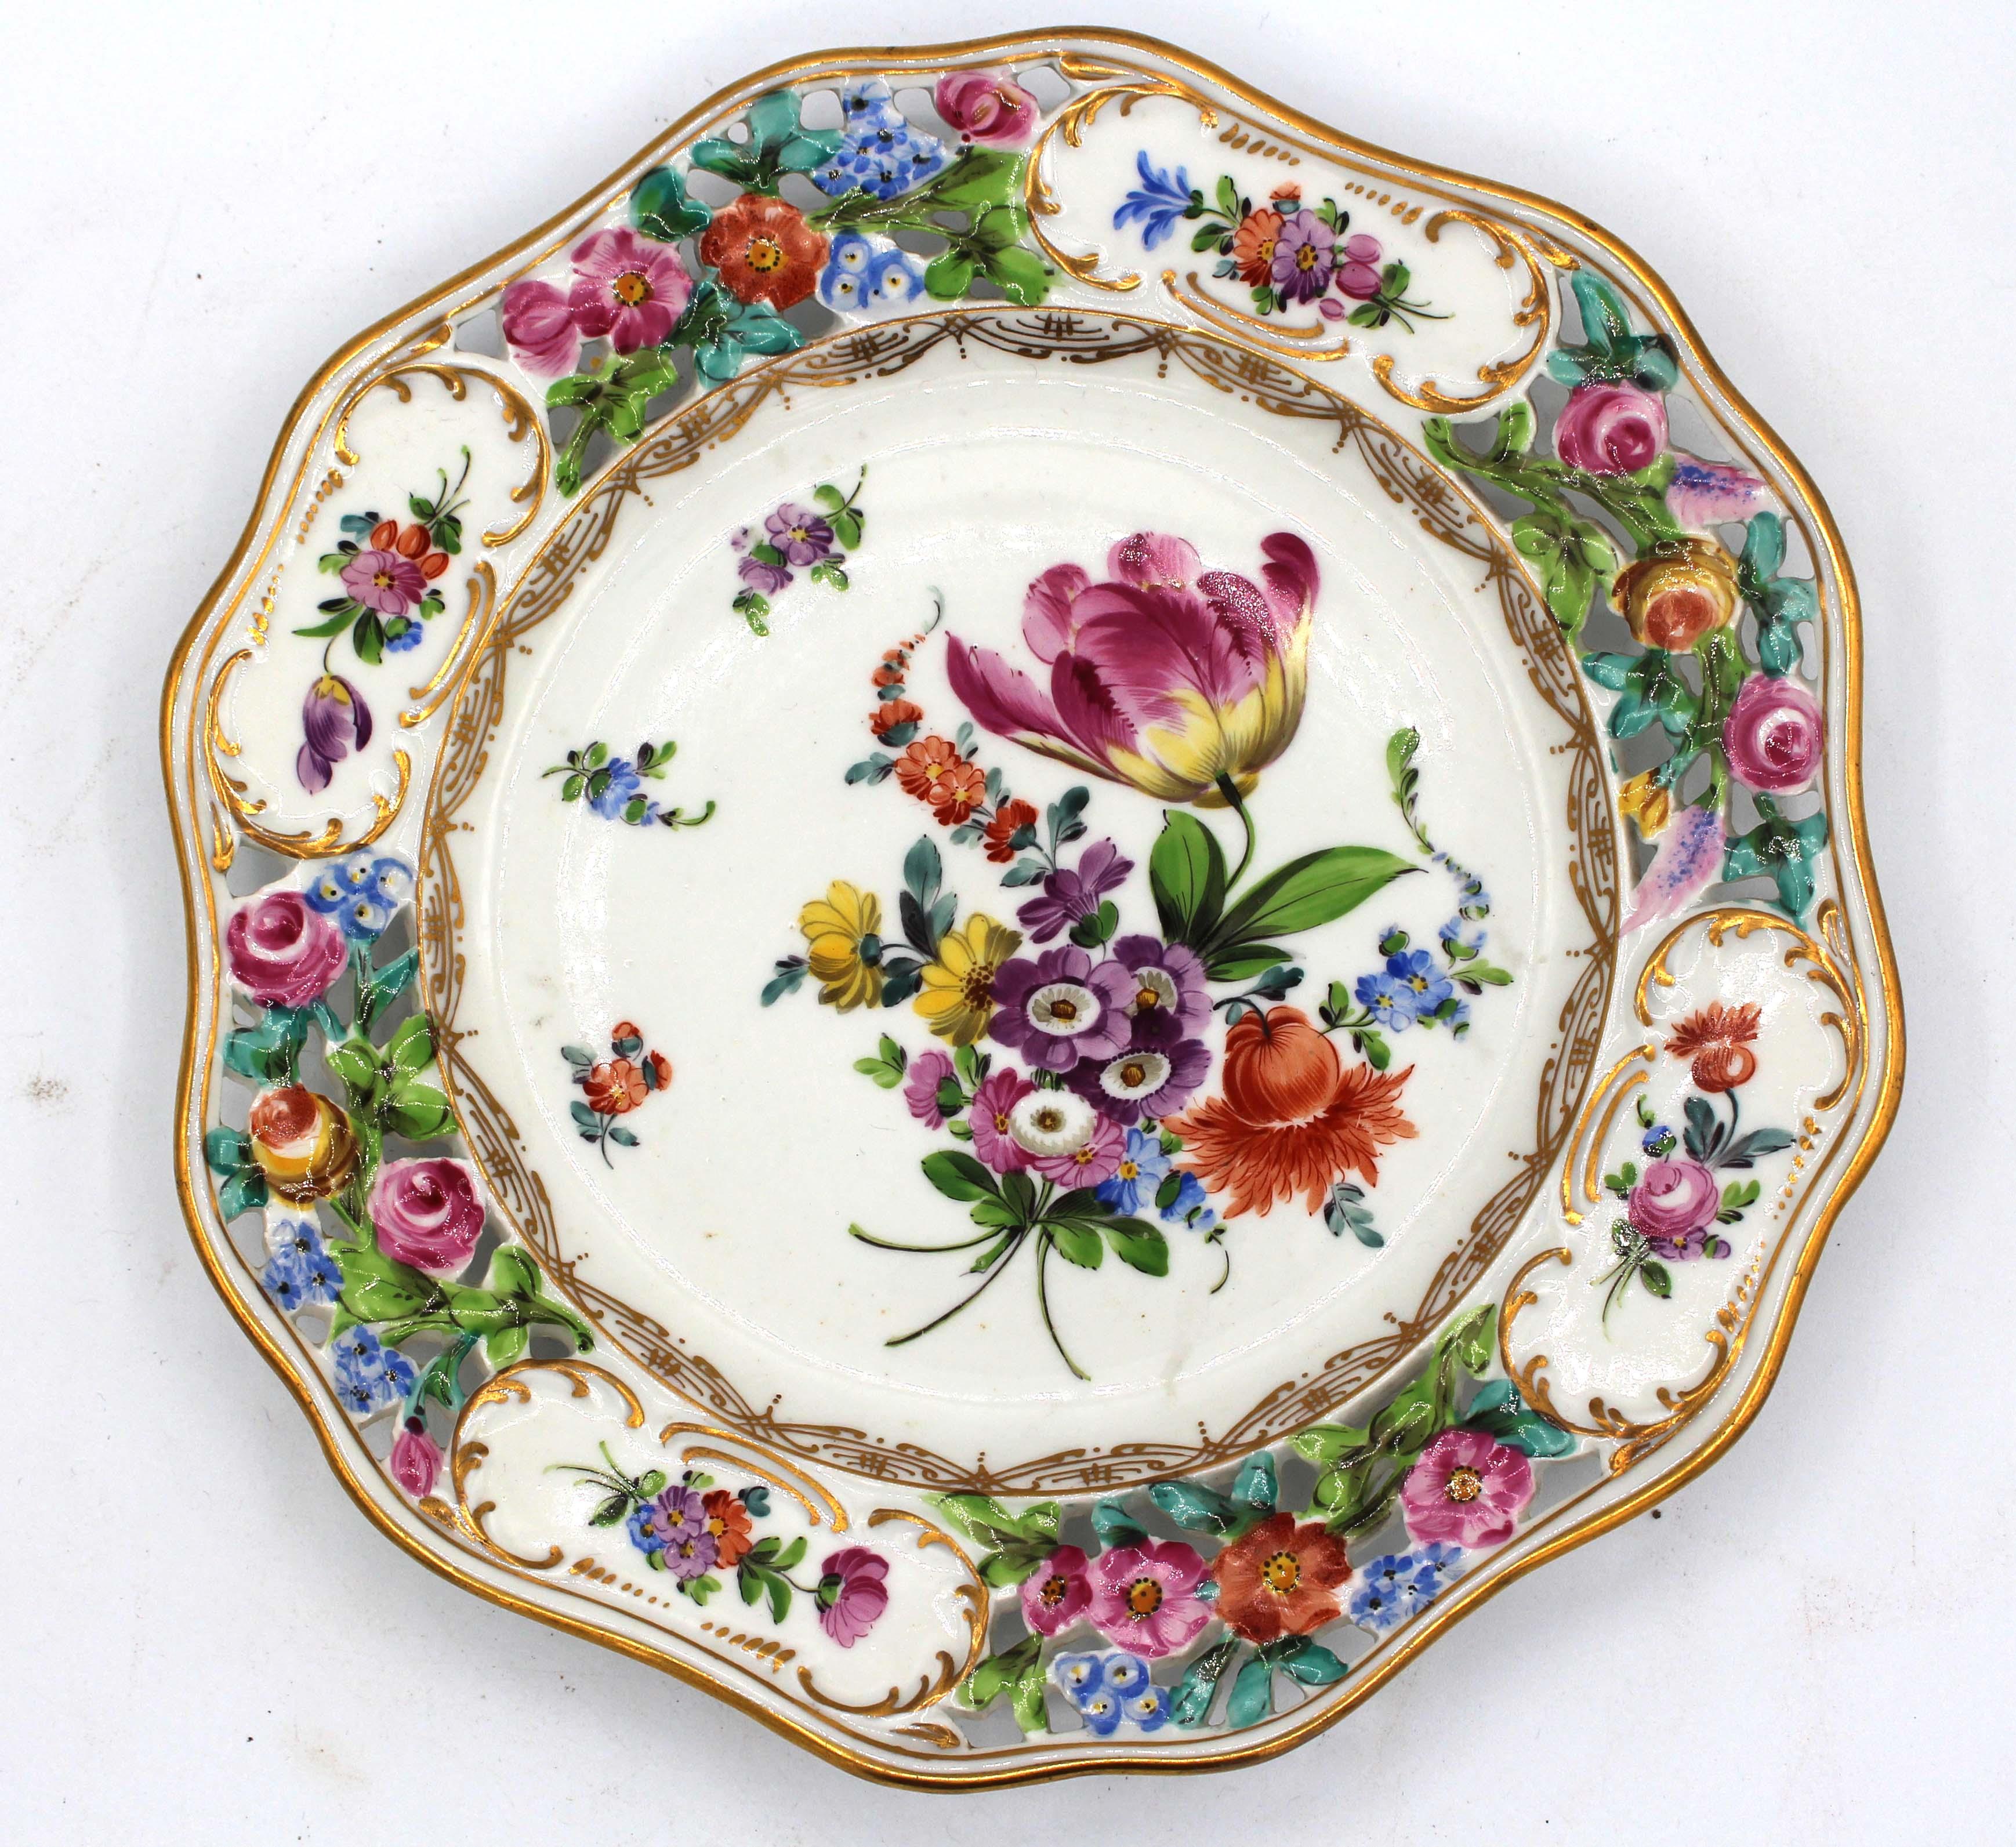 Circa 1902-1911 facing pair of reticulated porcelain dessert plates by Carl Thieme. With the SP mark for Saxony Porcelain and 